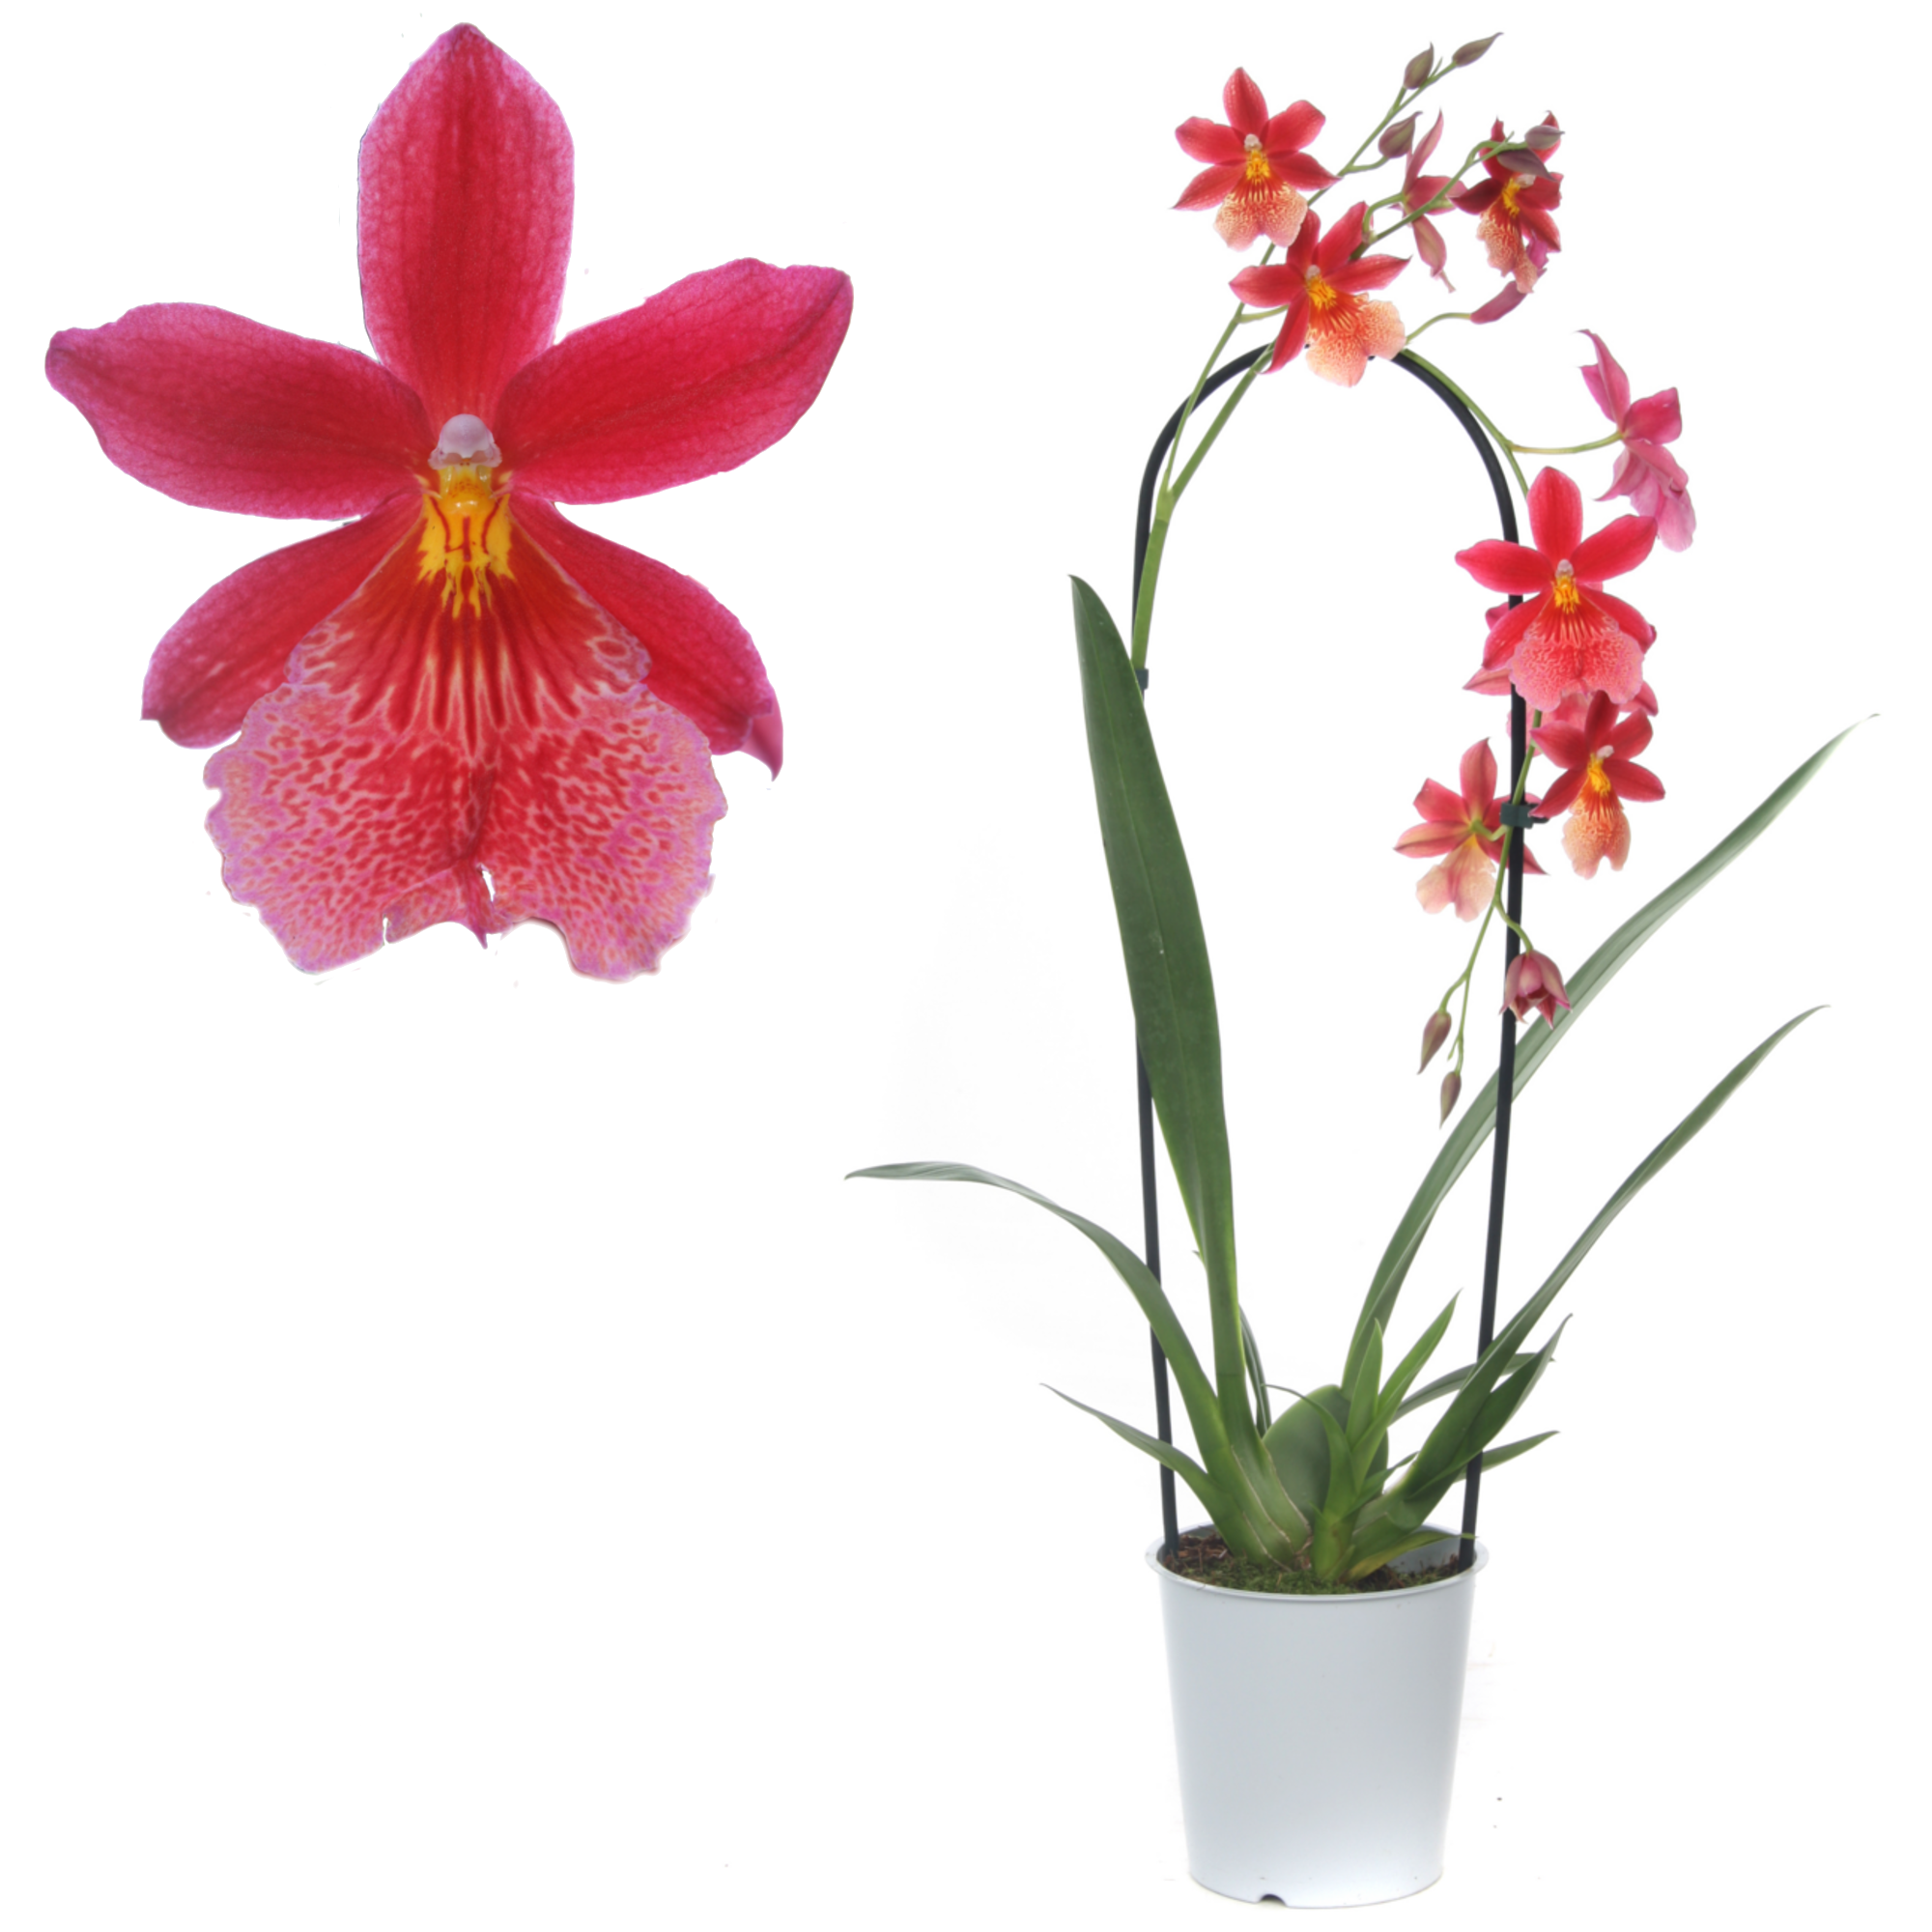 Cambria-Orchidee 'Nelly isler' 1 Rispe rot, 12 cm Topf + product picture